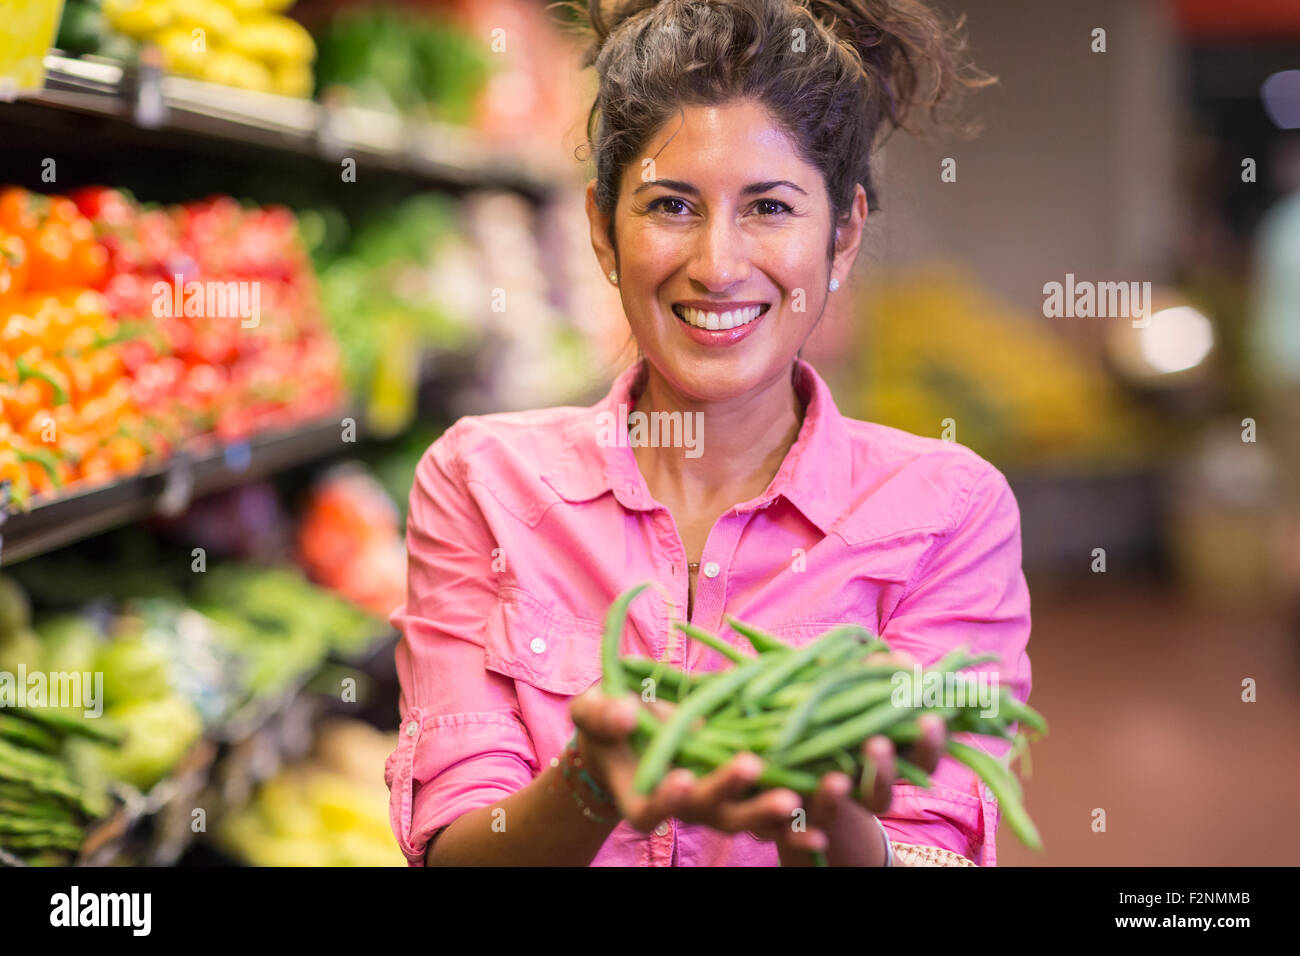 Hispanic woman holding vegetables at grocery store Stock Photo